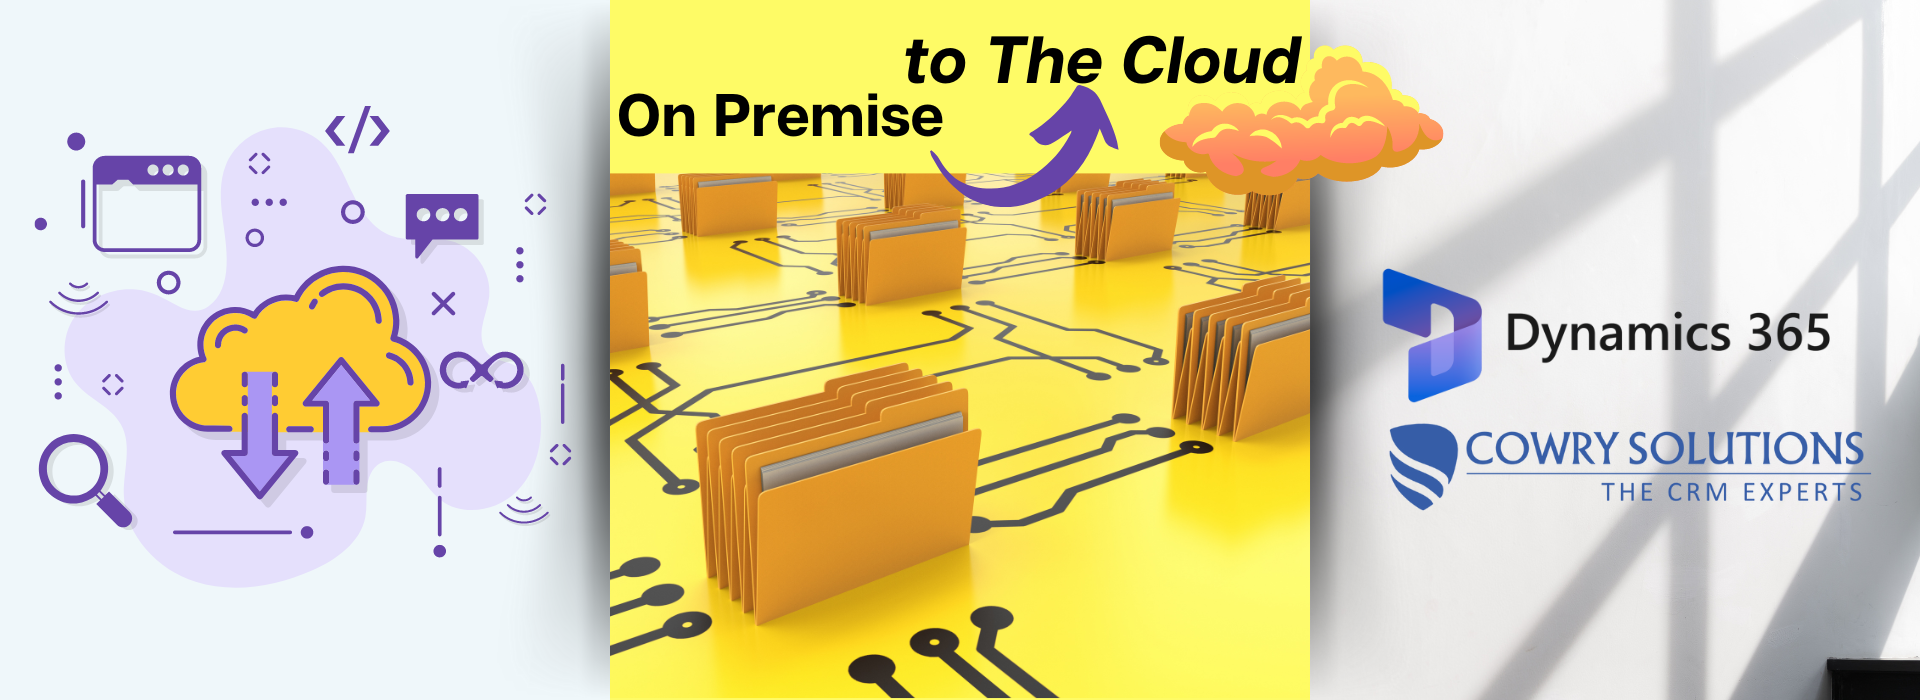 Featured image for “Dynamics CRM Migration from On Premise to the Cloud”